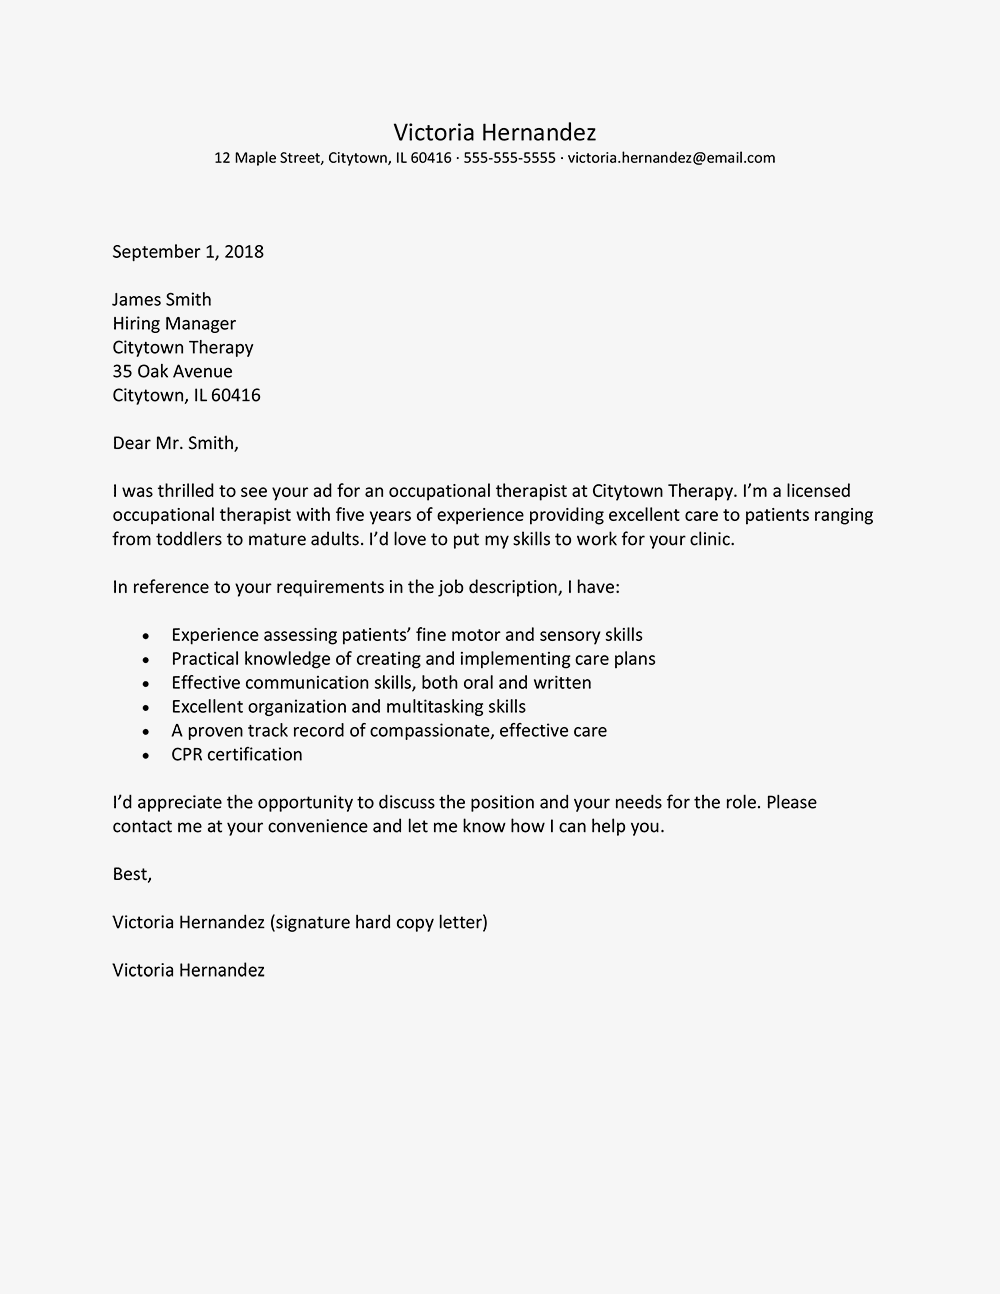 Excellent Cover Letter Samples from mthomearts.com